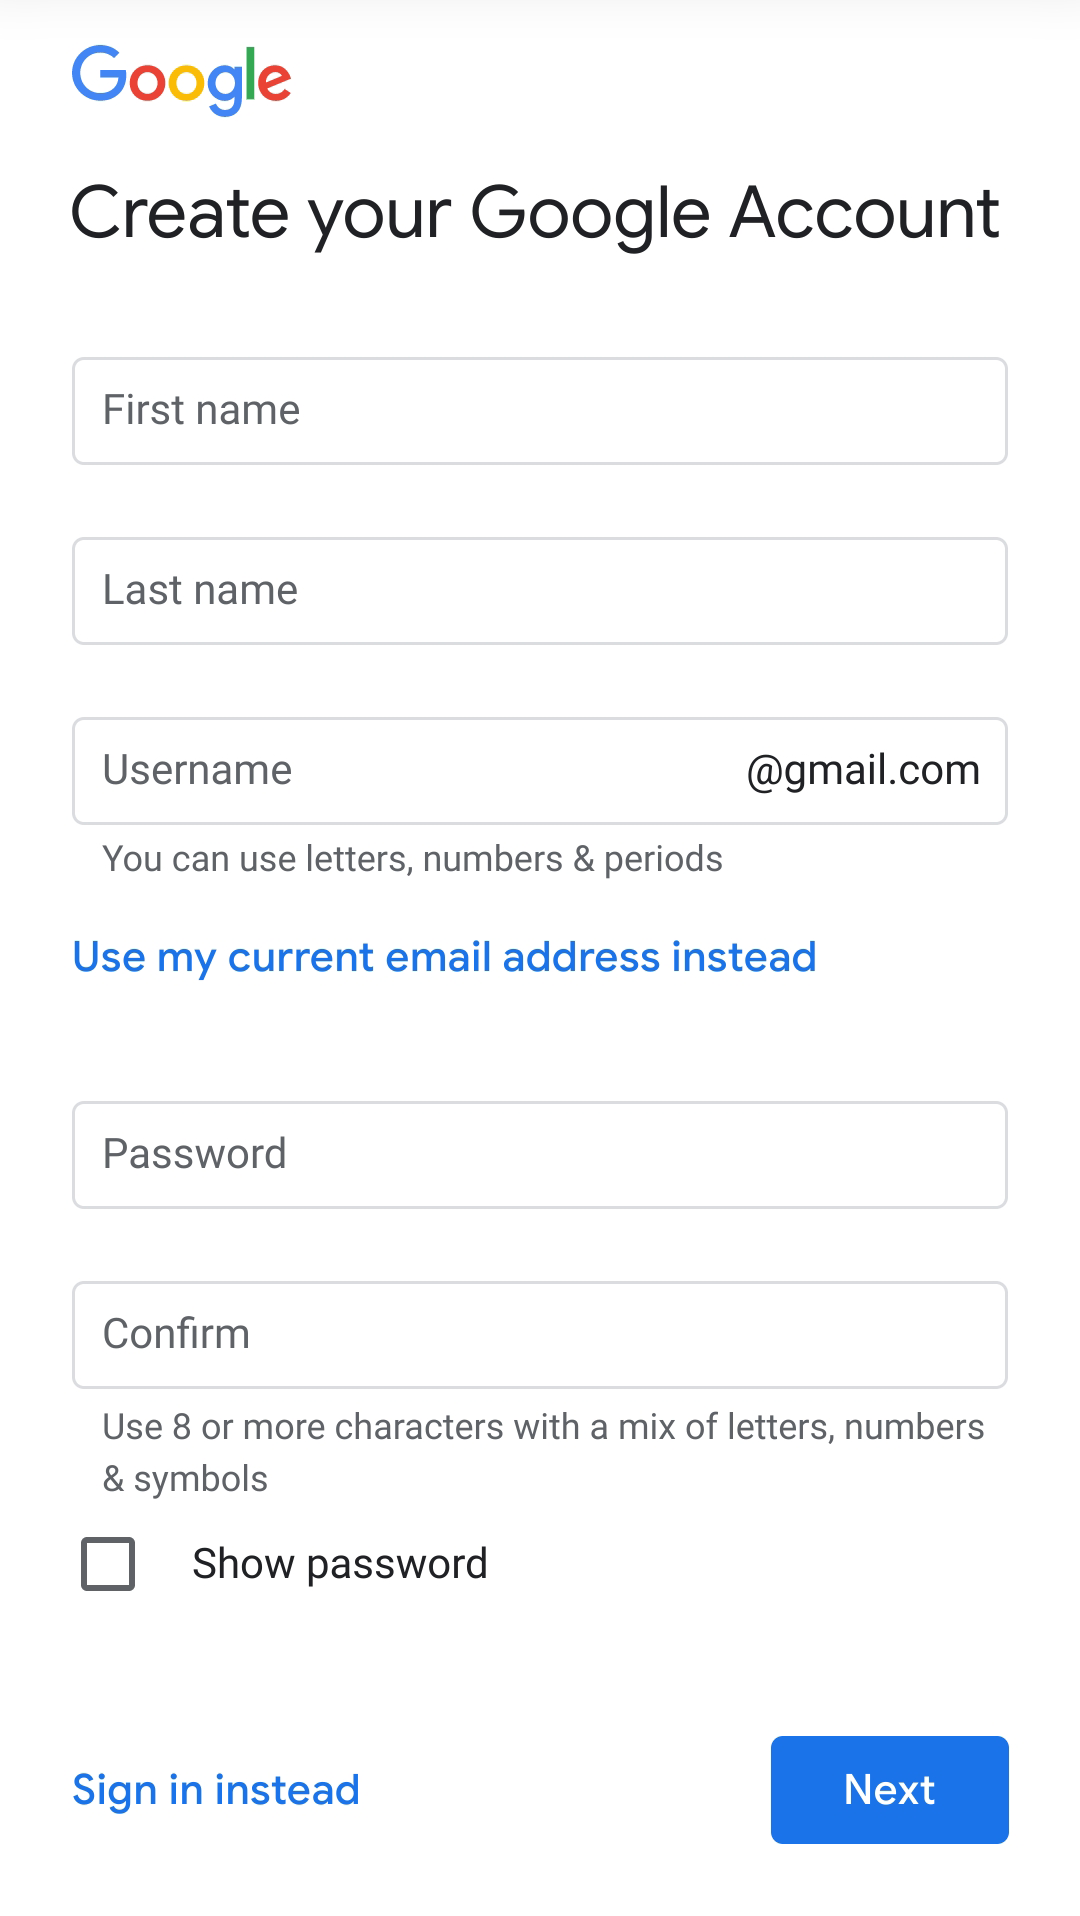 Enter your name, username and password on Google